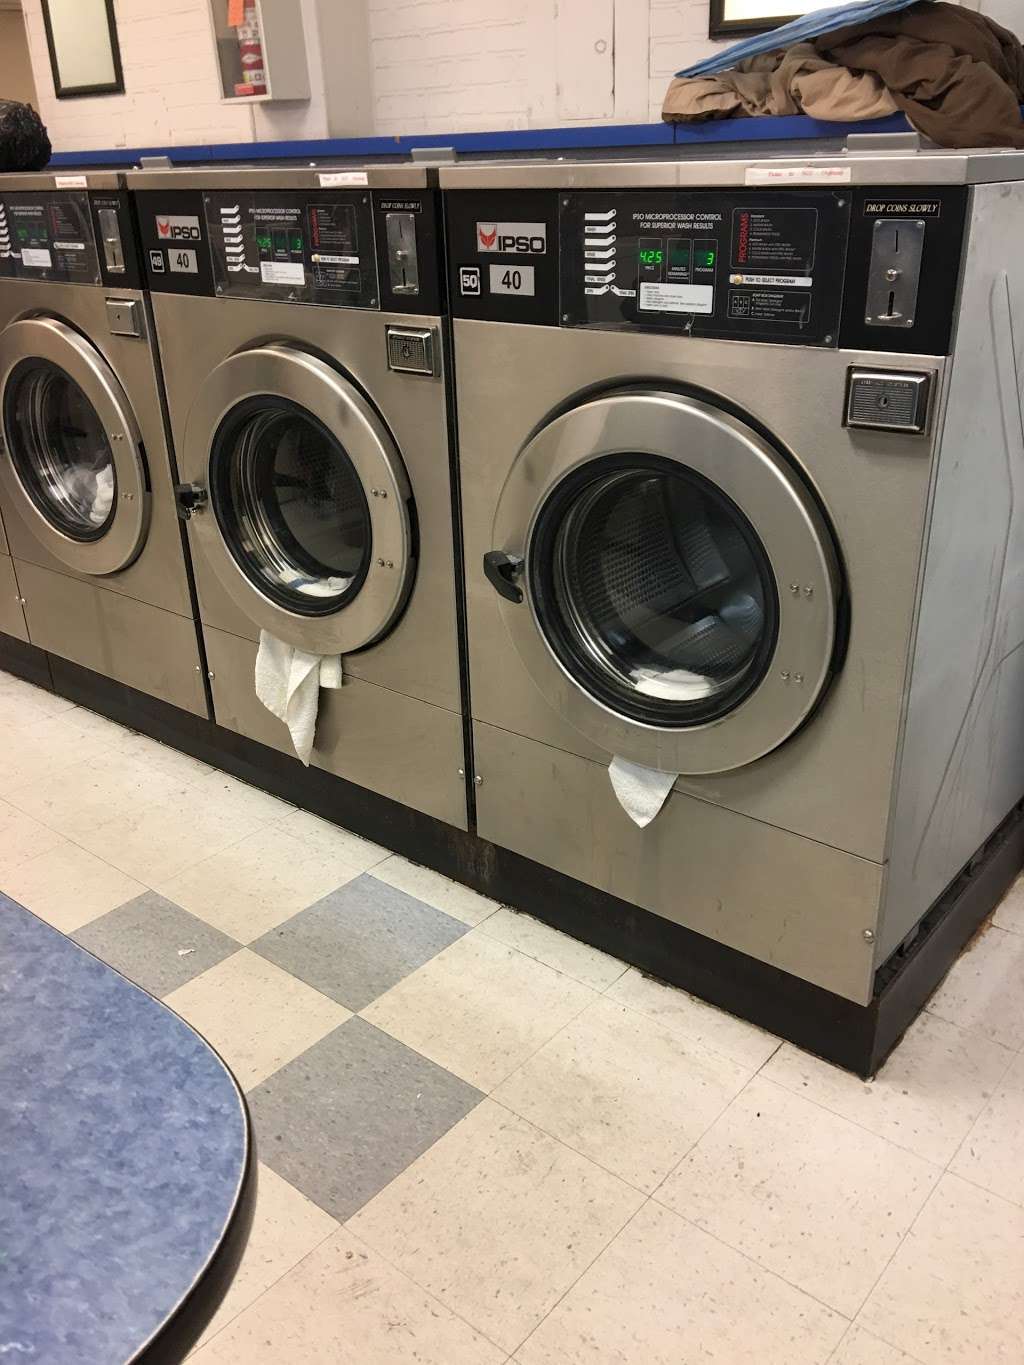 Maytag Coin Laundry And Fluff And Fold | 10311 Zelzah Ave, Northridge, CA 91326 | Phone: (818) 217-4179